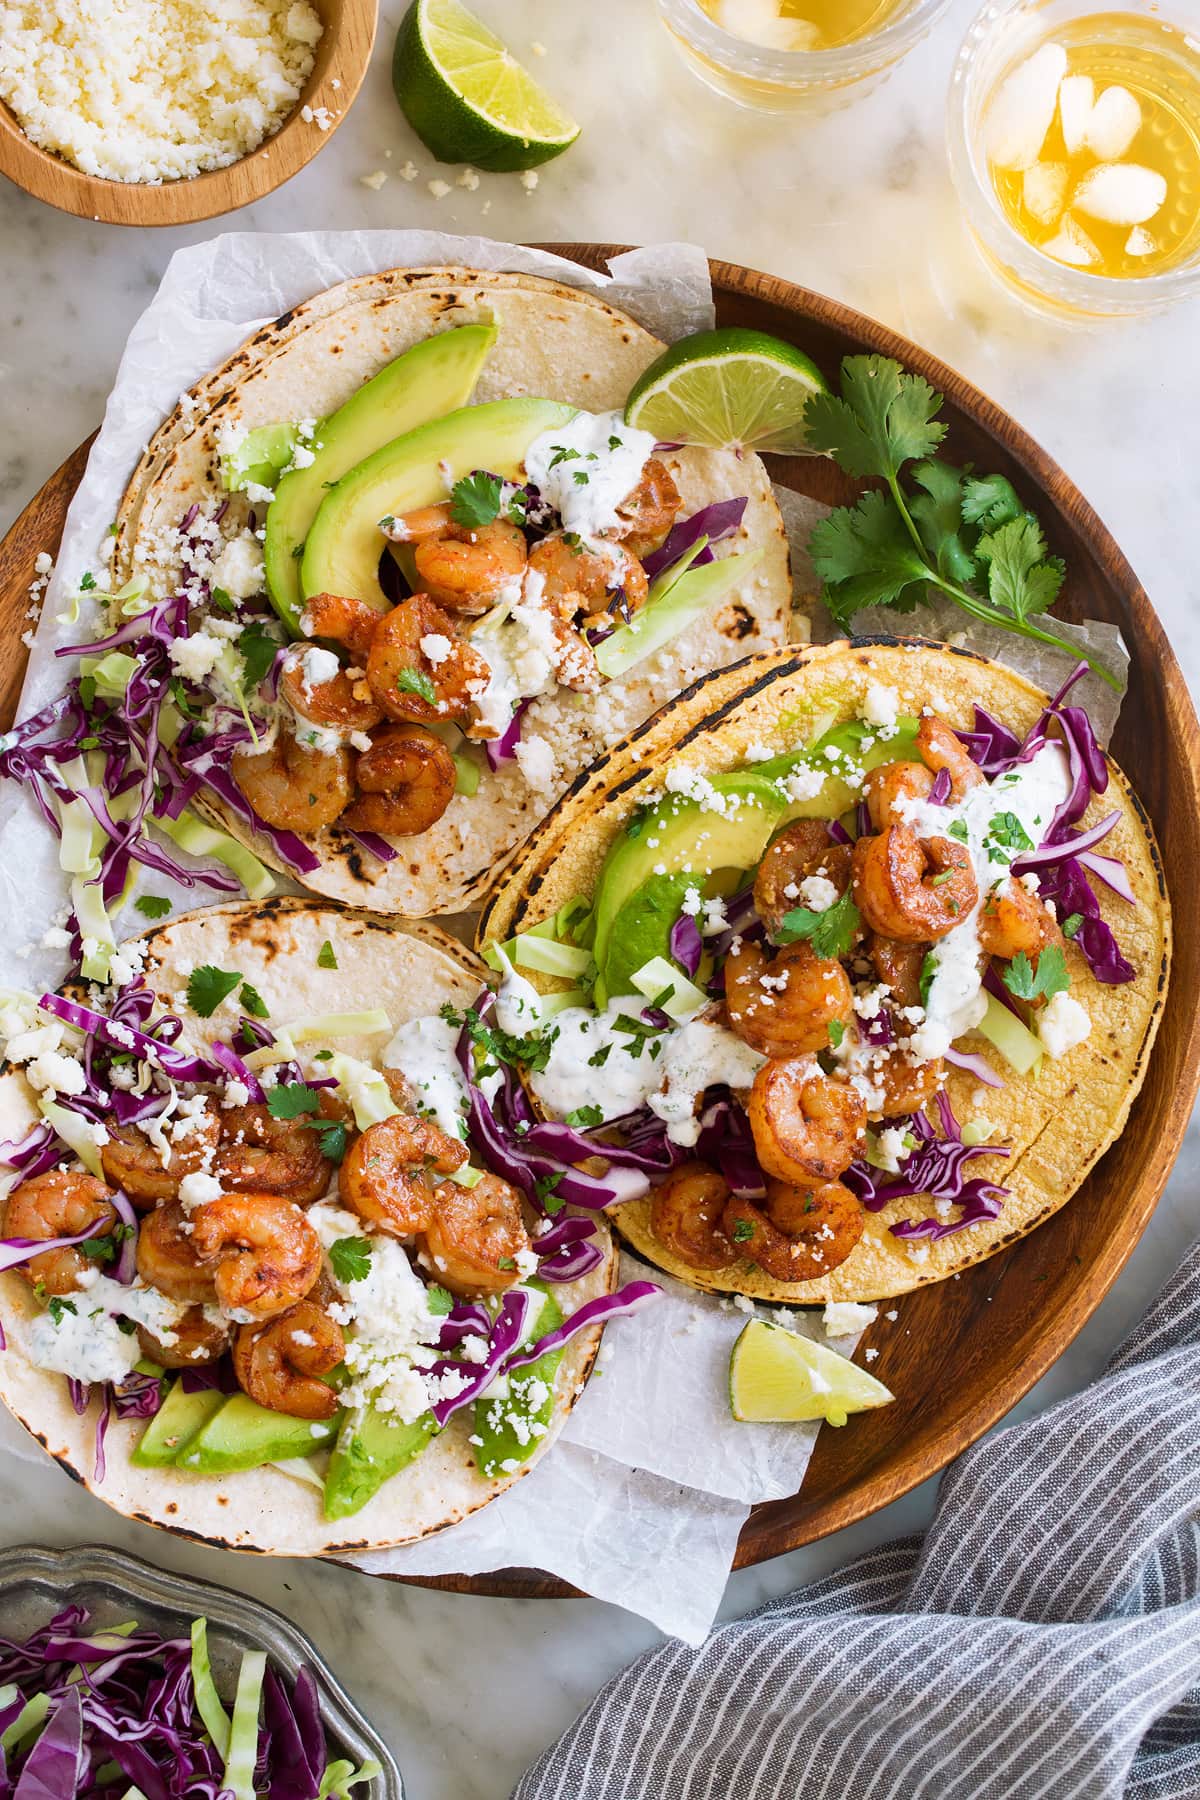 Shrimp Tacos on a wooden serving plate on parchment. Tacos are topped with cabbage, avocado, and cilantro lime crema.